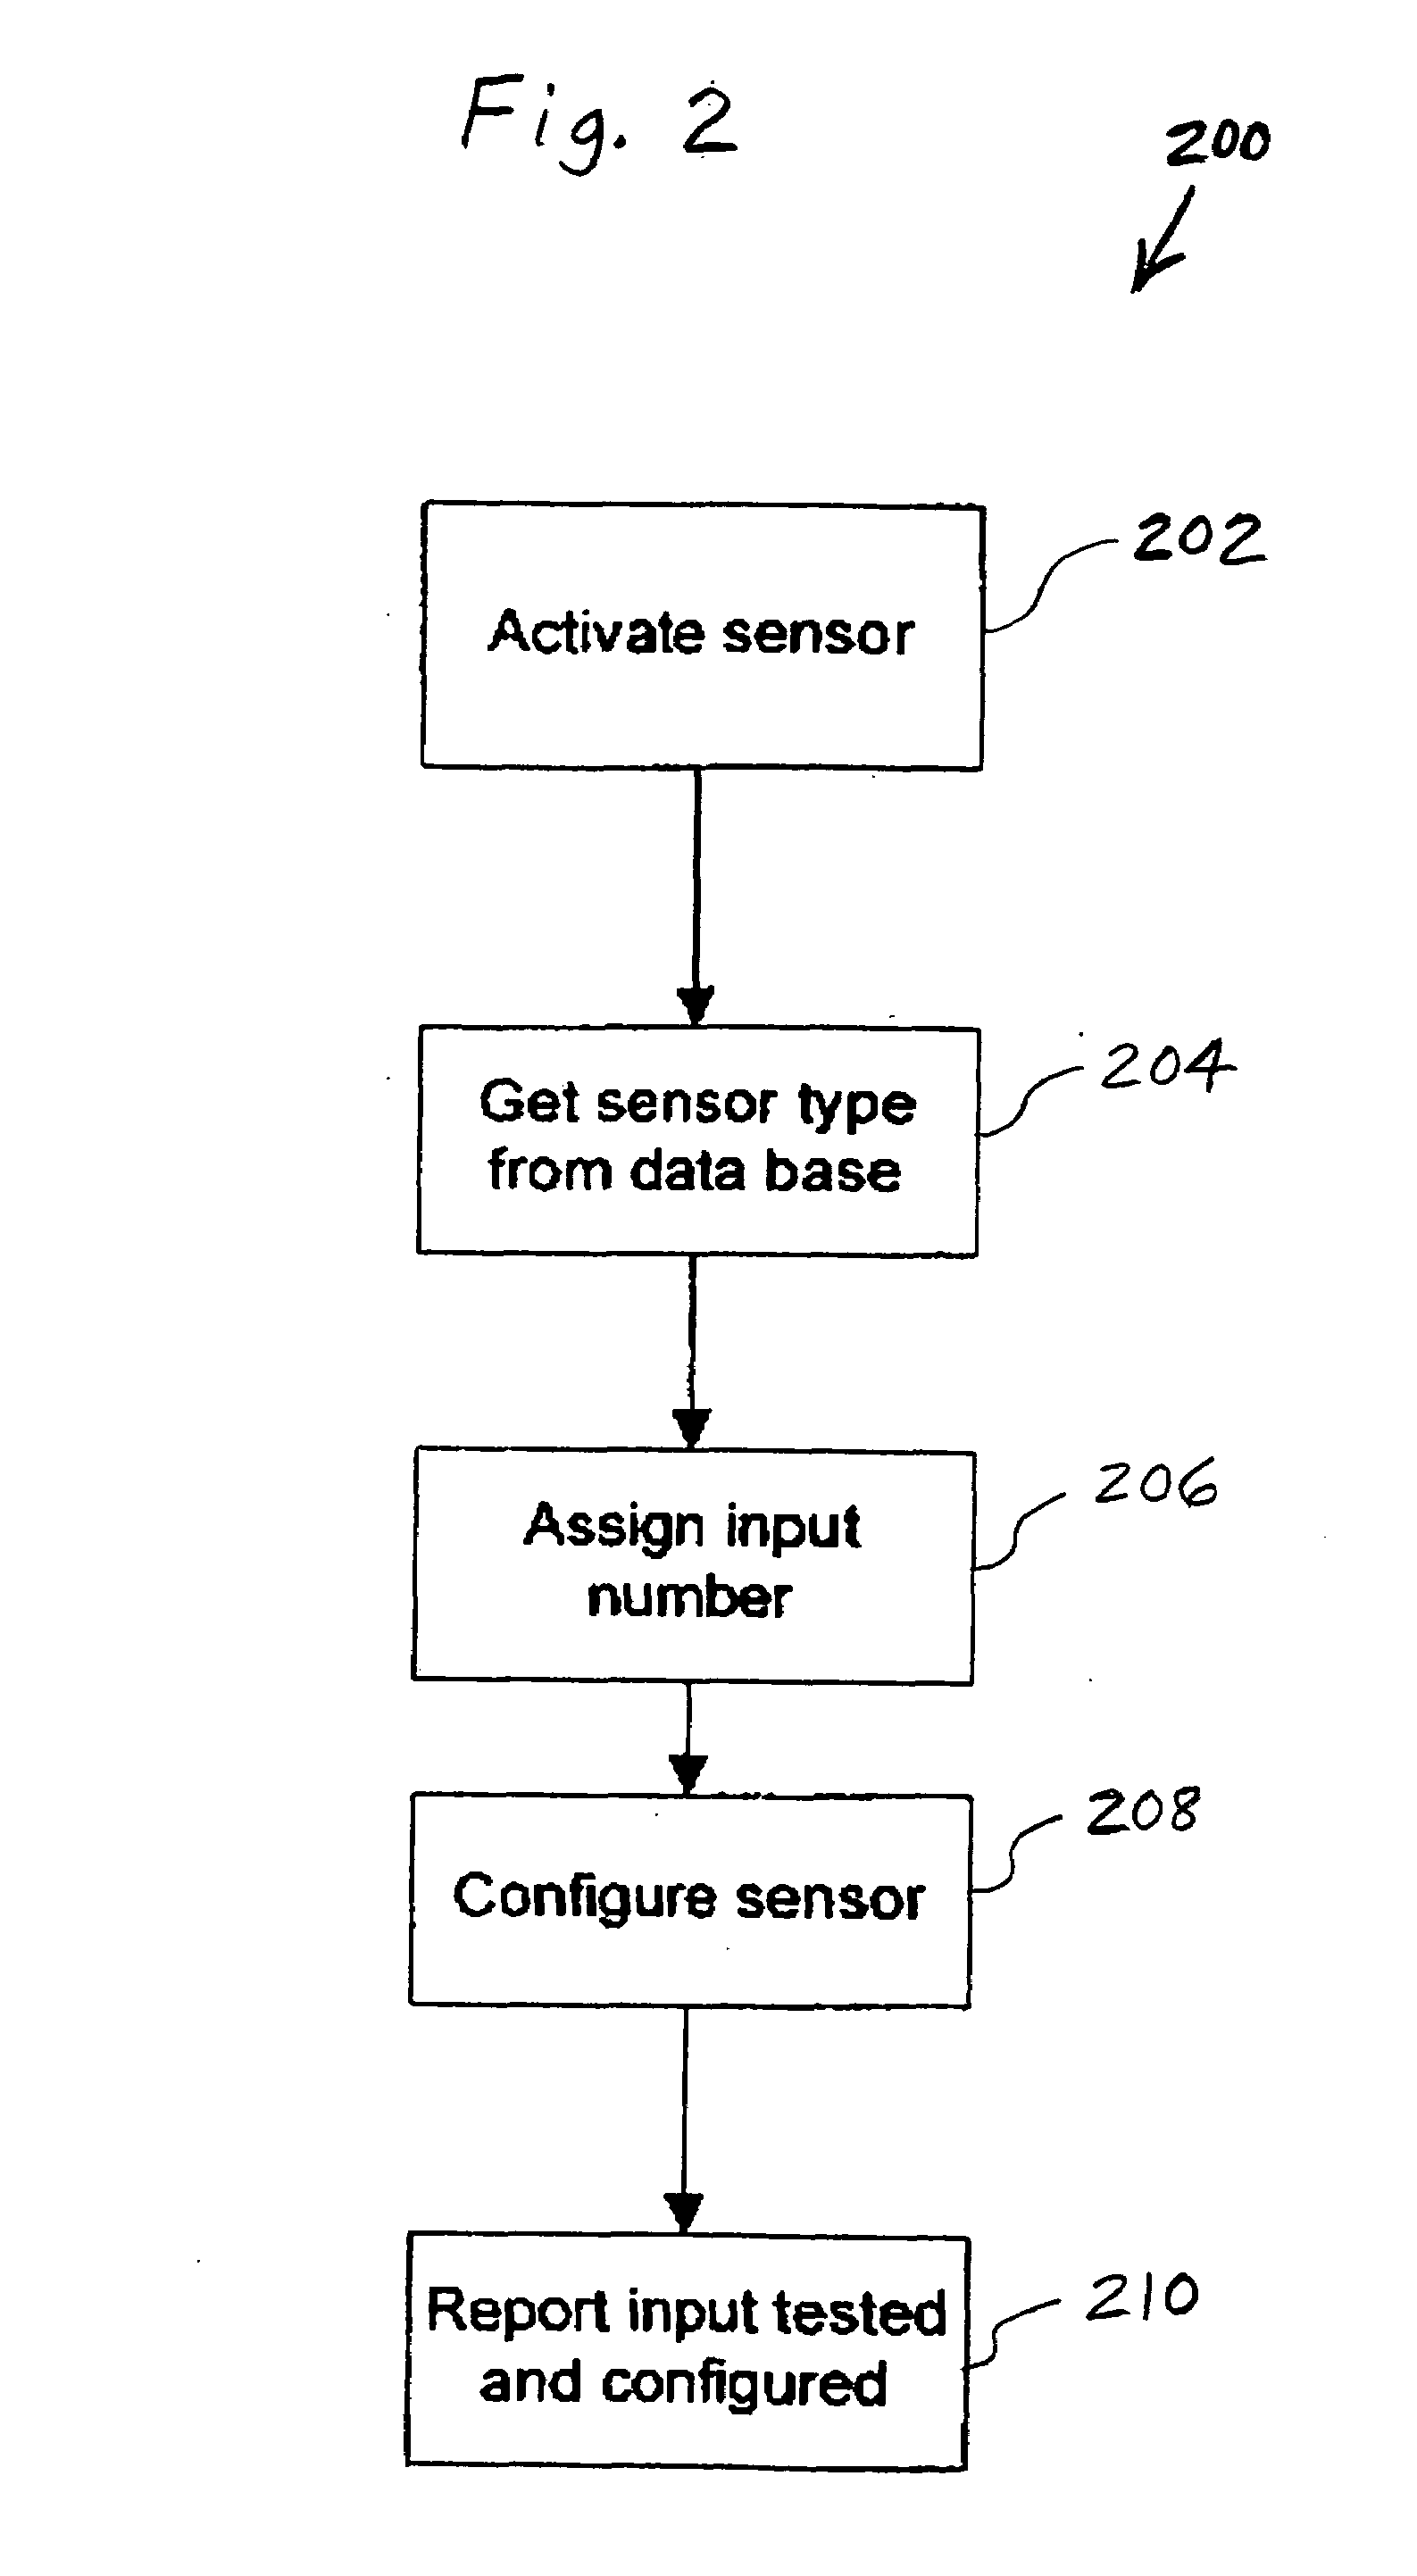 Method and apparatus for installing a wireless security system